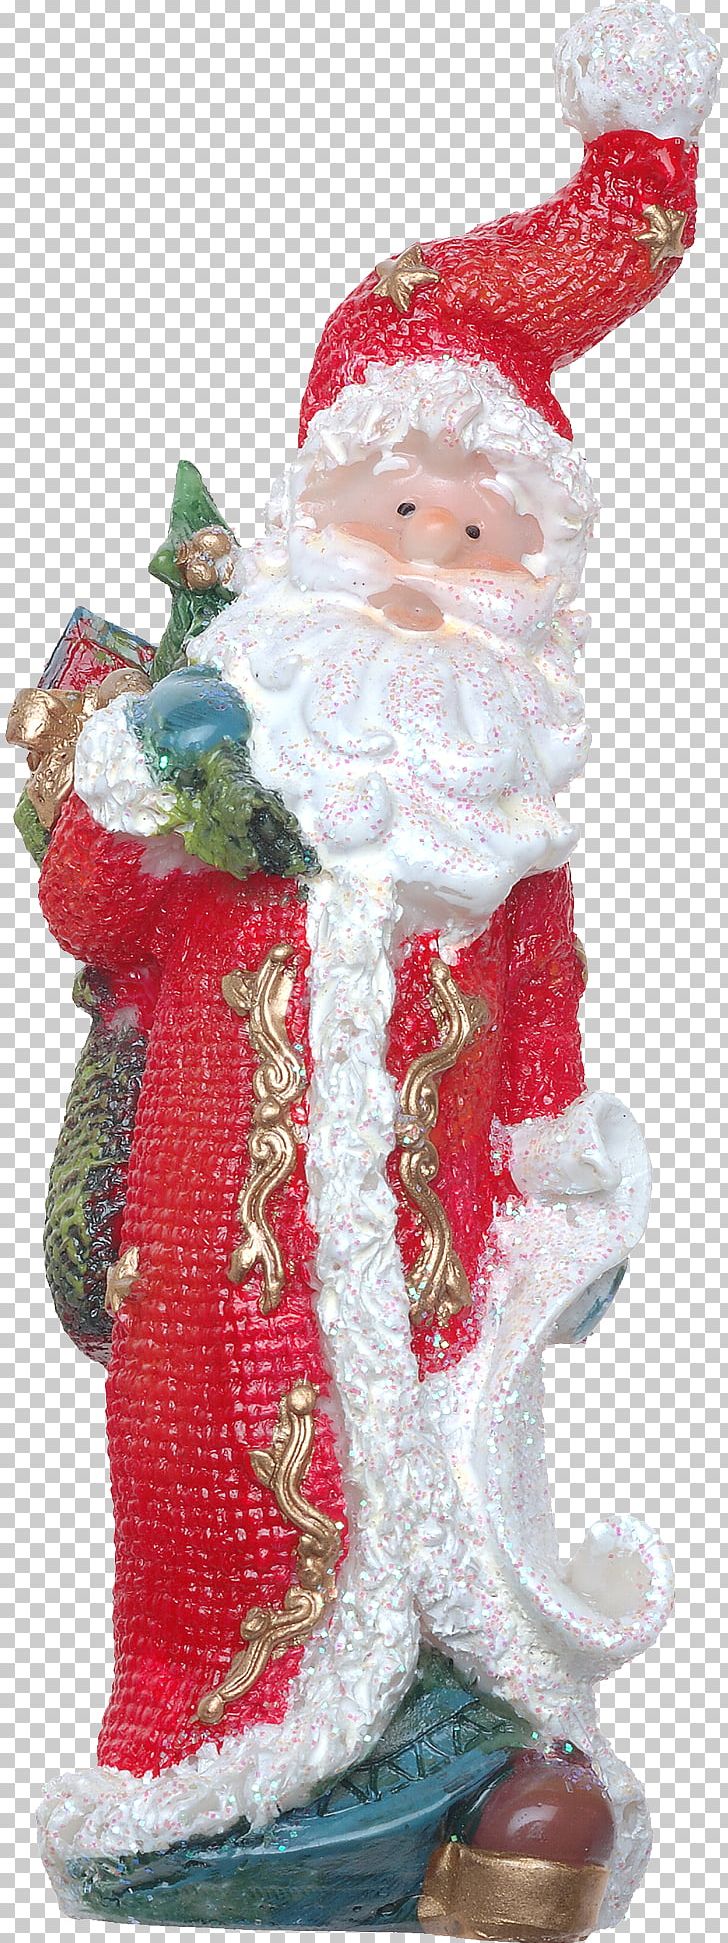 Ded Moroz Santa Claus Snegurochka Christmas Ornament Grandfather PNG, Clipart, Character, Christmas, Christmas Decoration, Christmas Ornament, Ded Moroz Free PNG Download